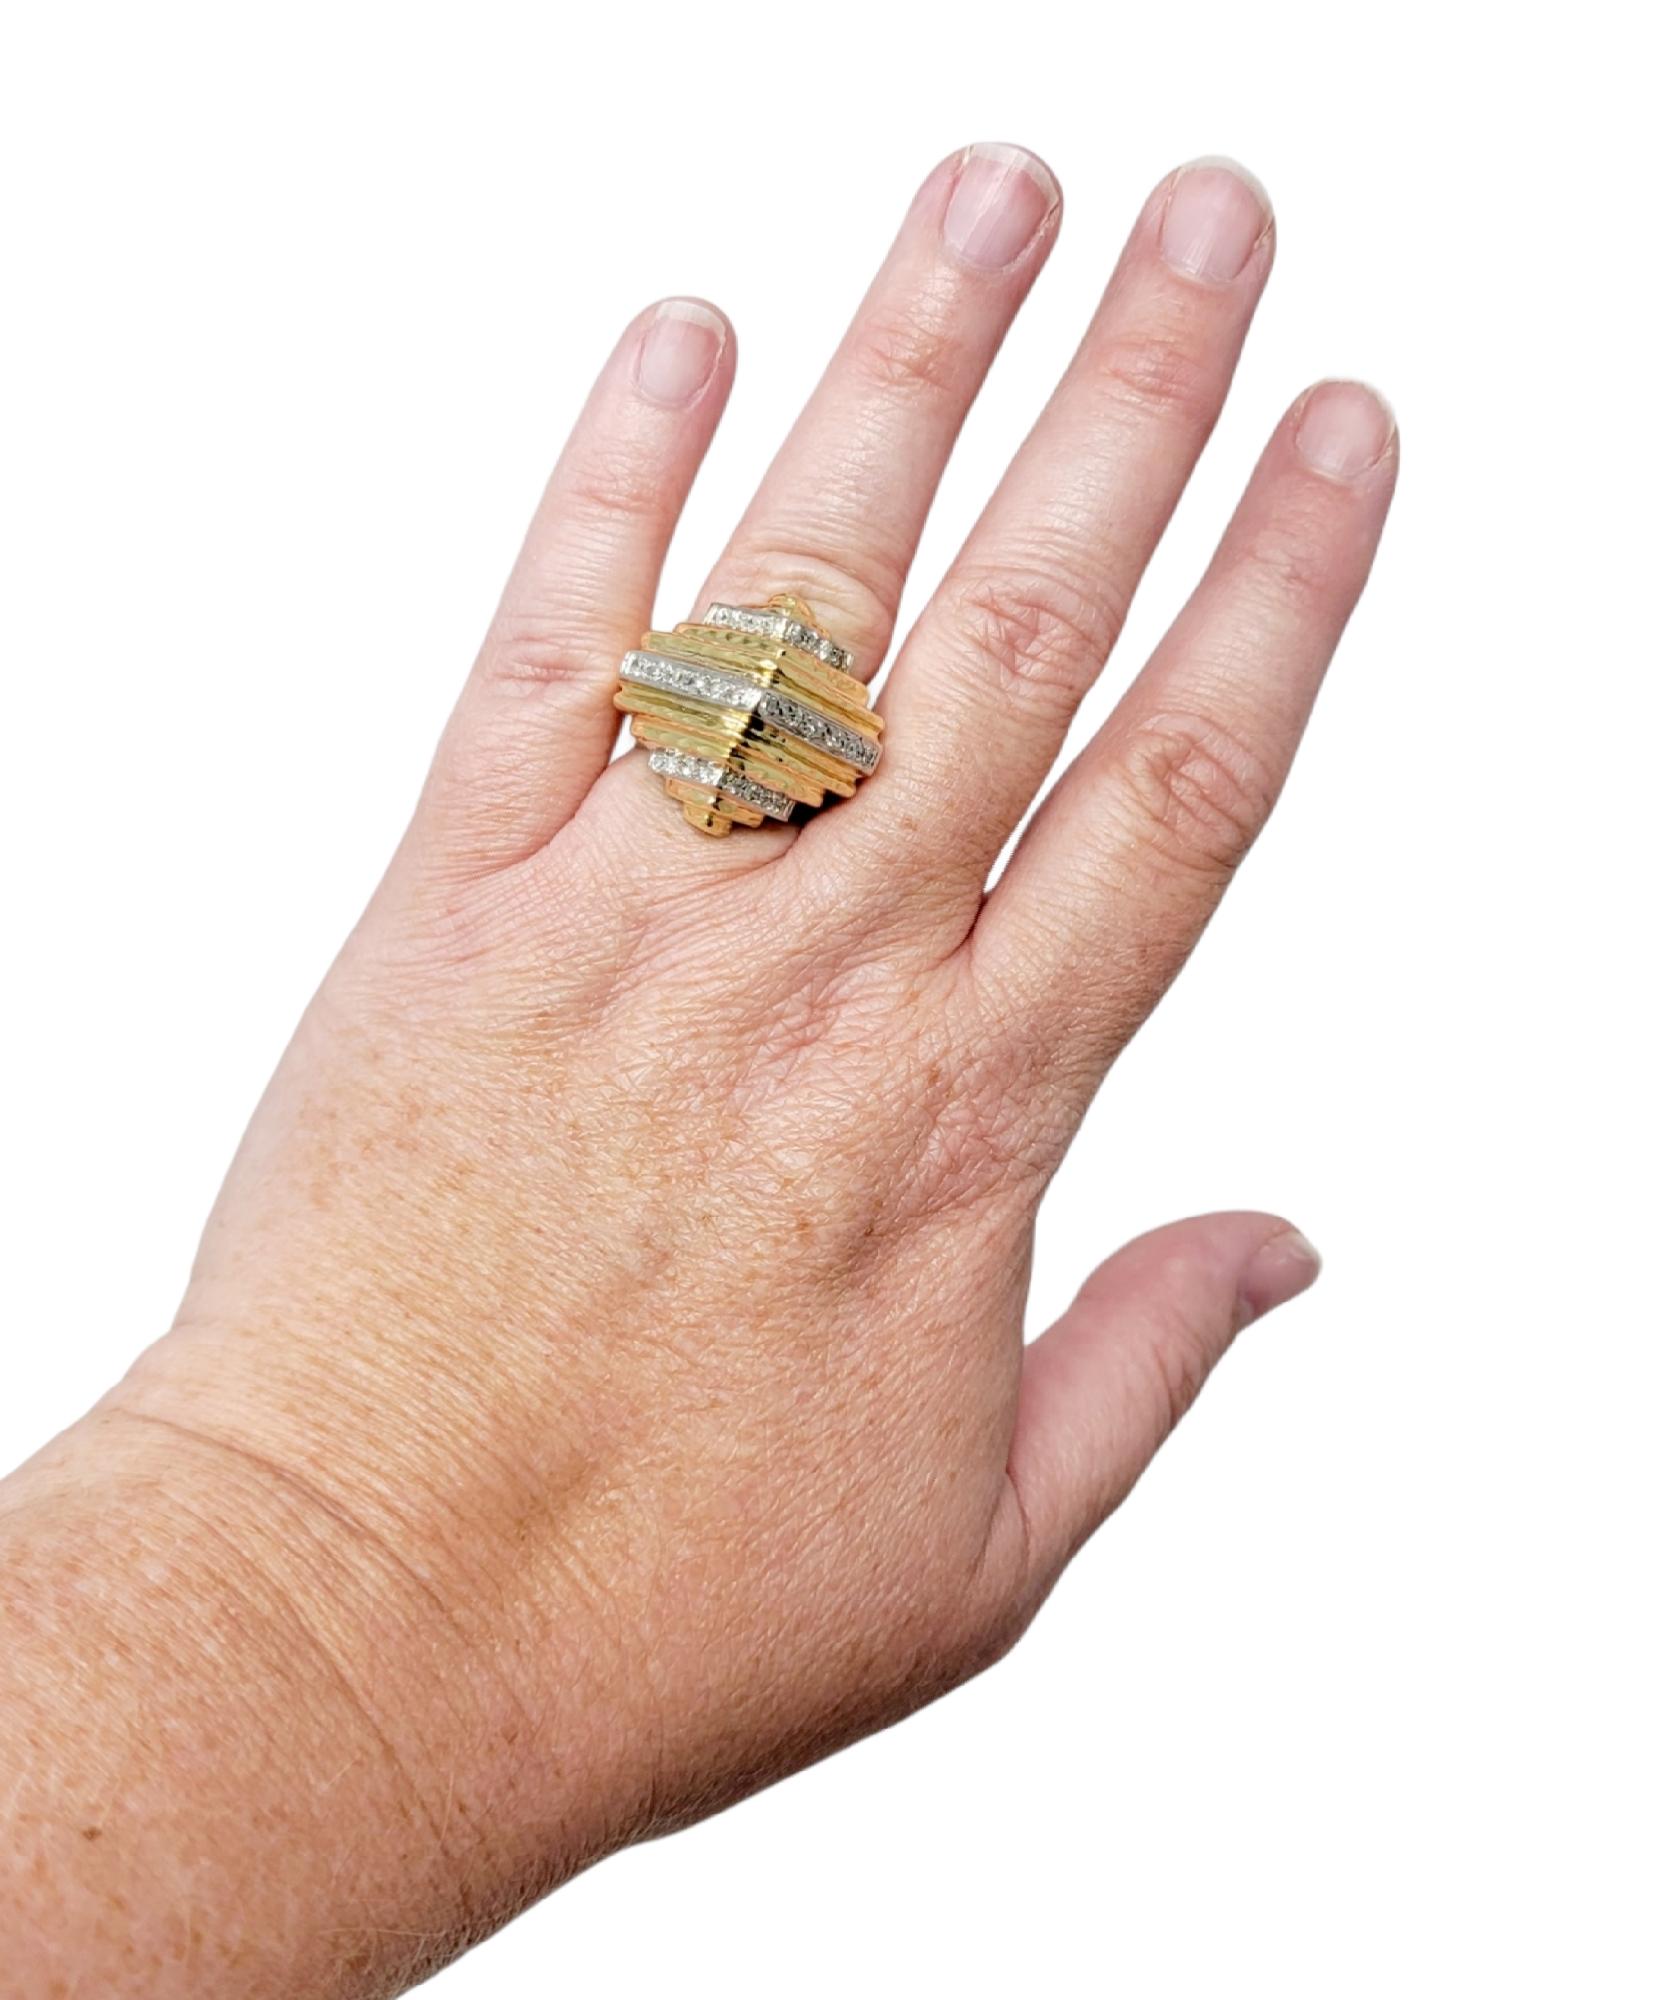 Diamond Tower Dome Chevron Cocktail Ring 14 Karat Yellow Gold F-G / VS In Good Condition For Sale In Scottsdale, AZ